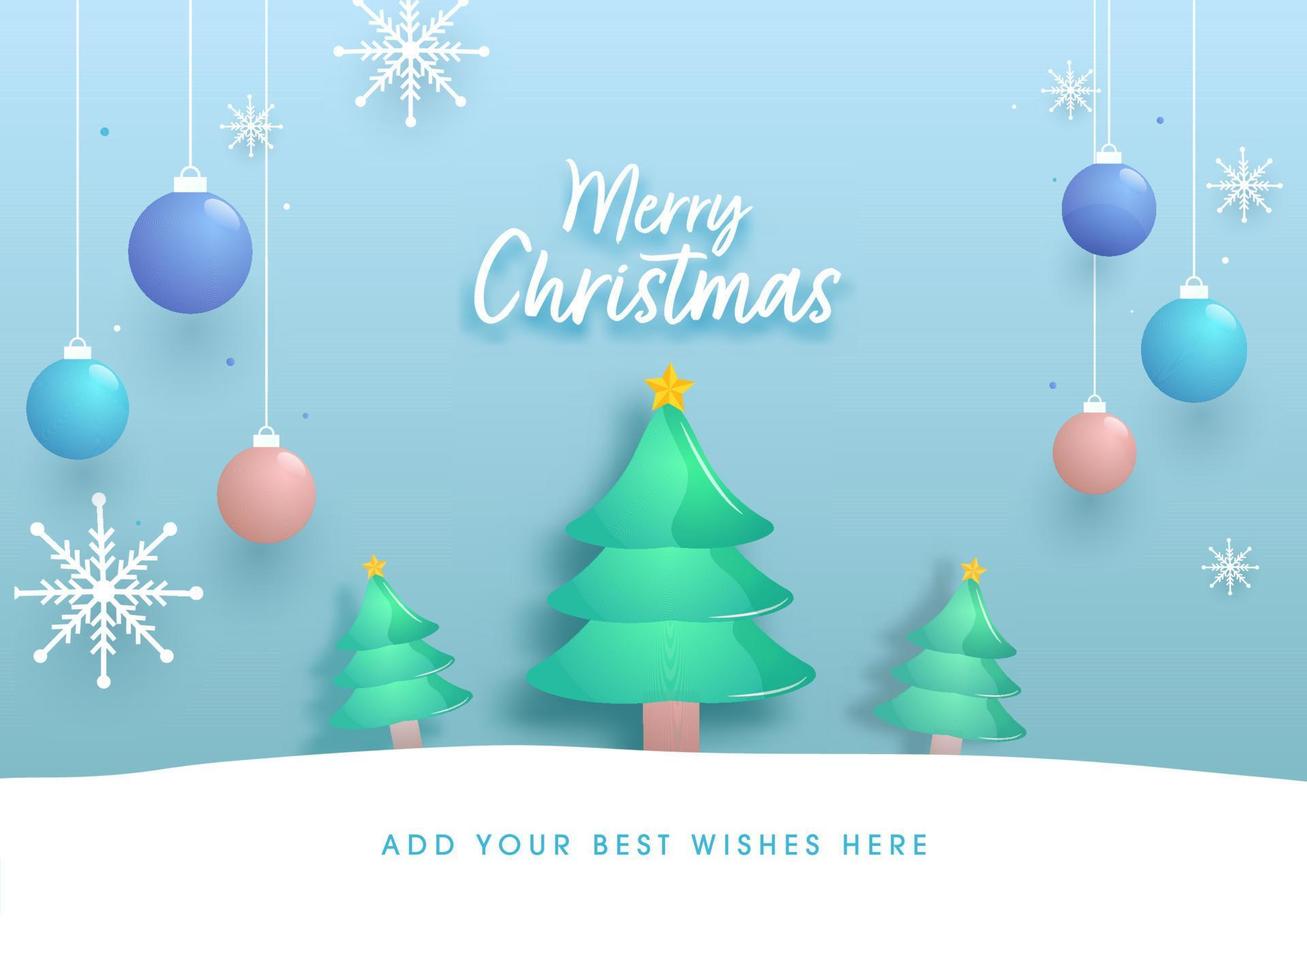 Merry Christmas Font With Glossy Xmas Trees, Hanging Baubles, Snowflakes Decorated On Blue And White Background. vector